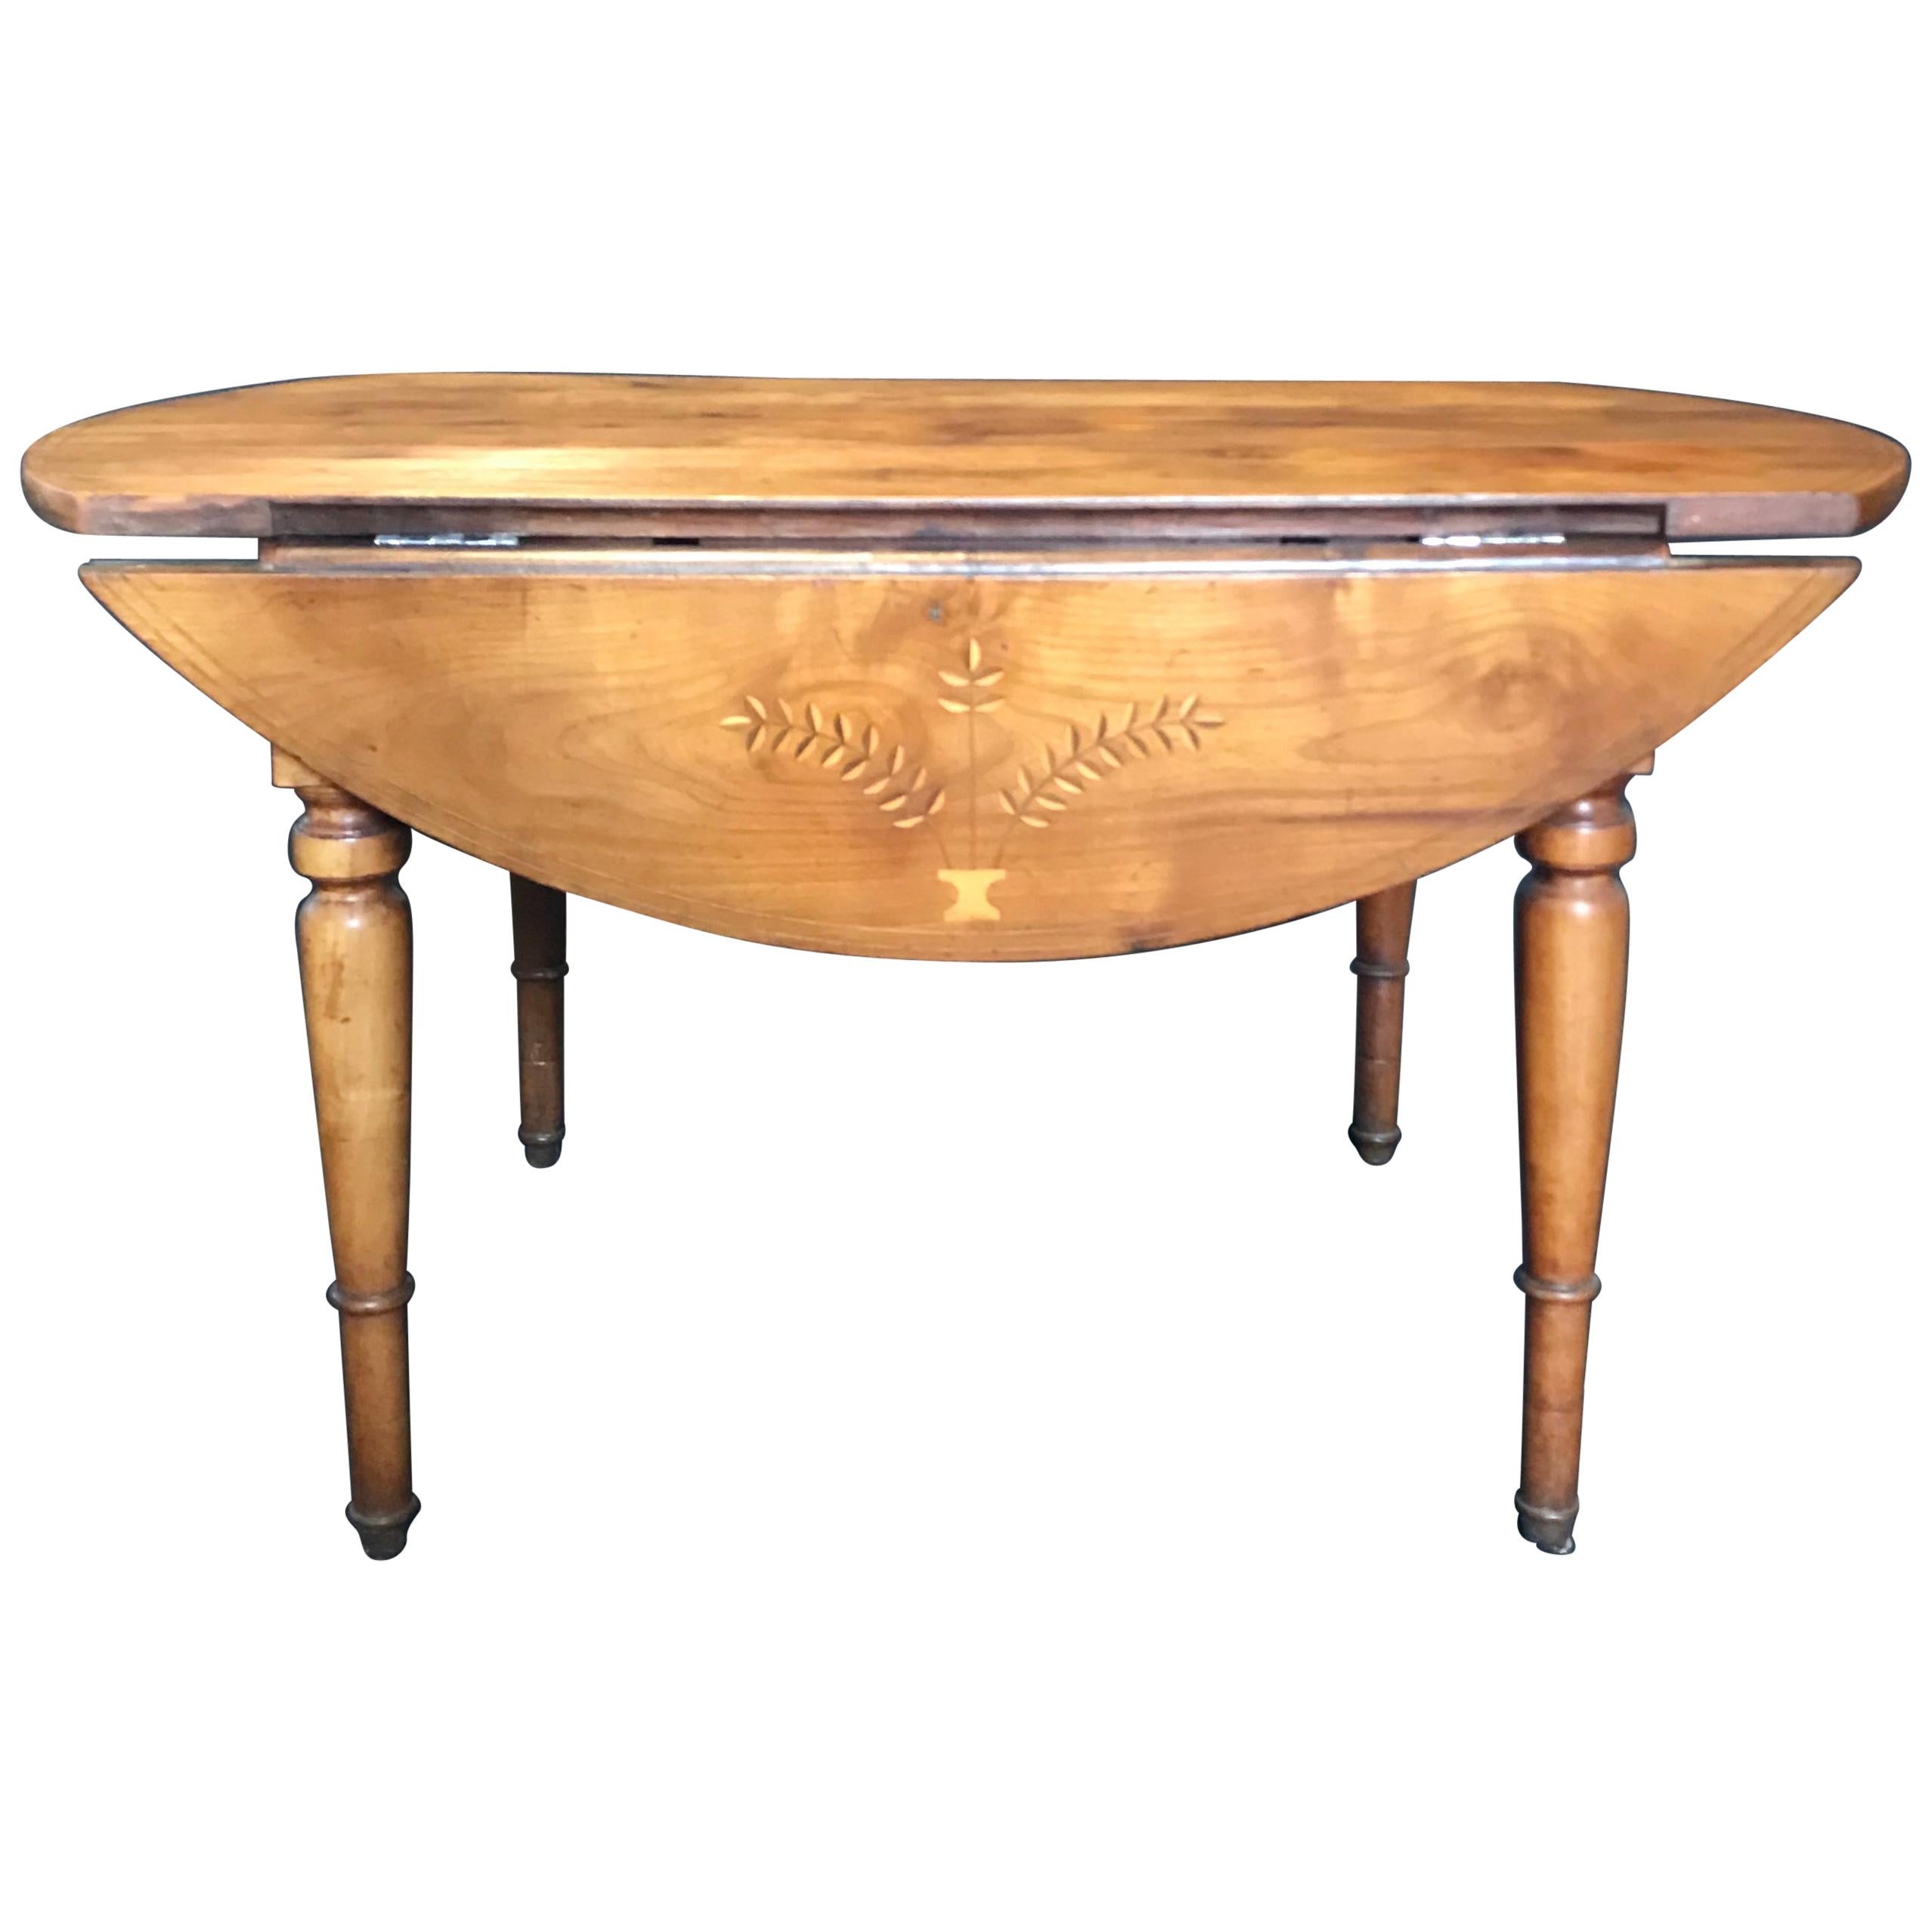 French Rectangular and Round Table with Marquetry on Leaves